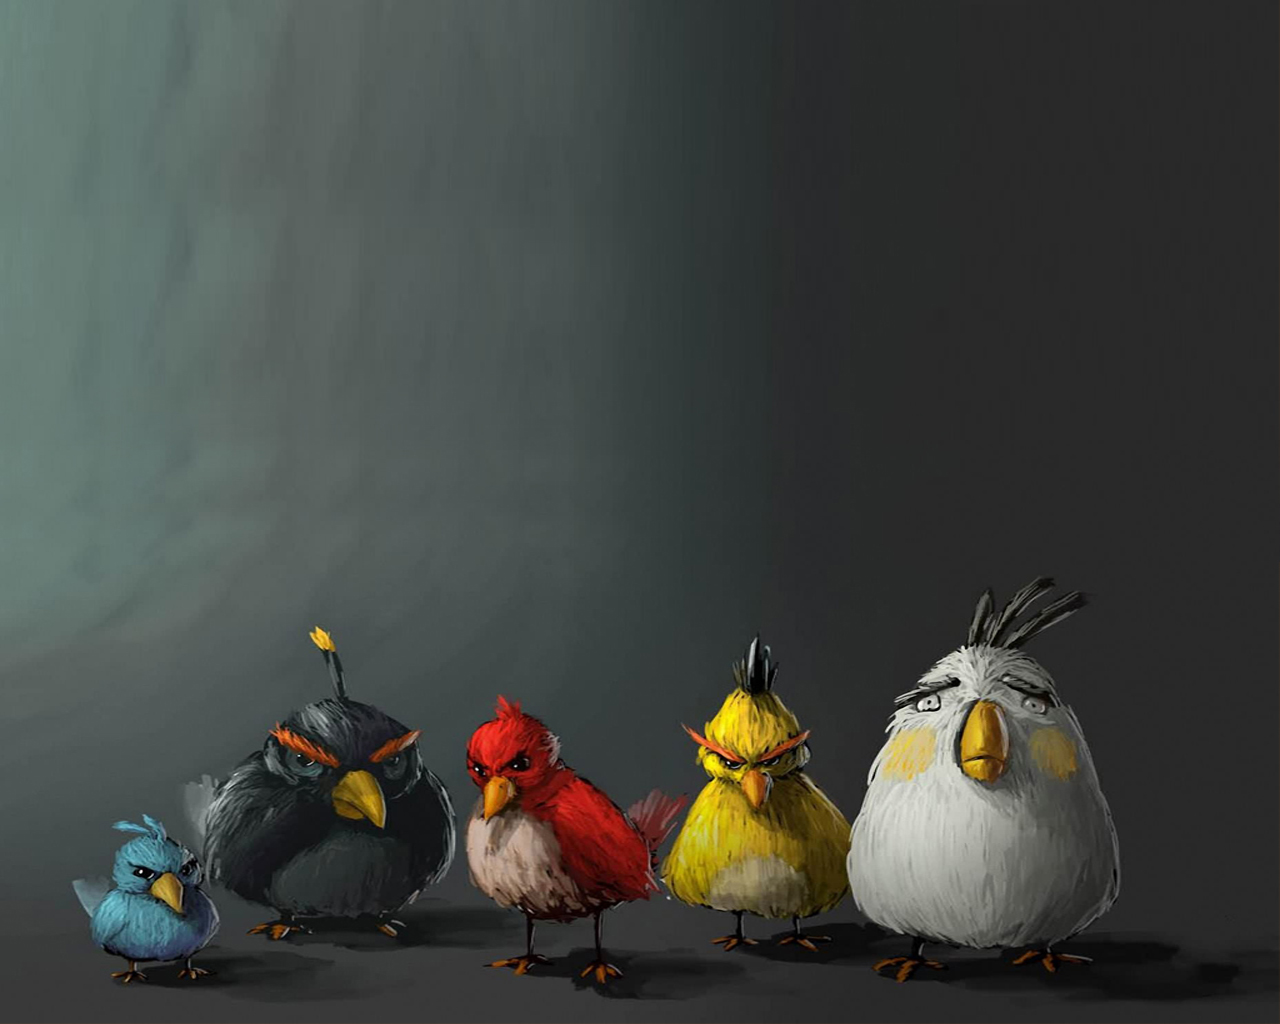  Angry Birds HQ Background Images